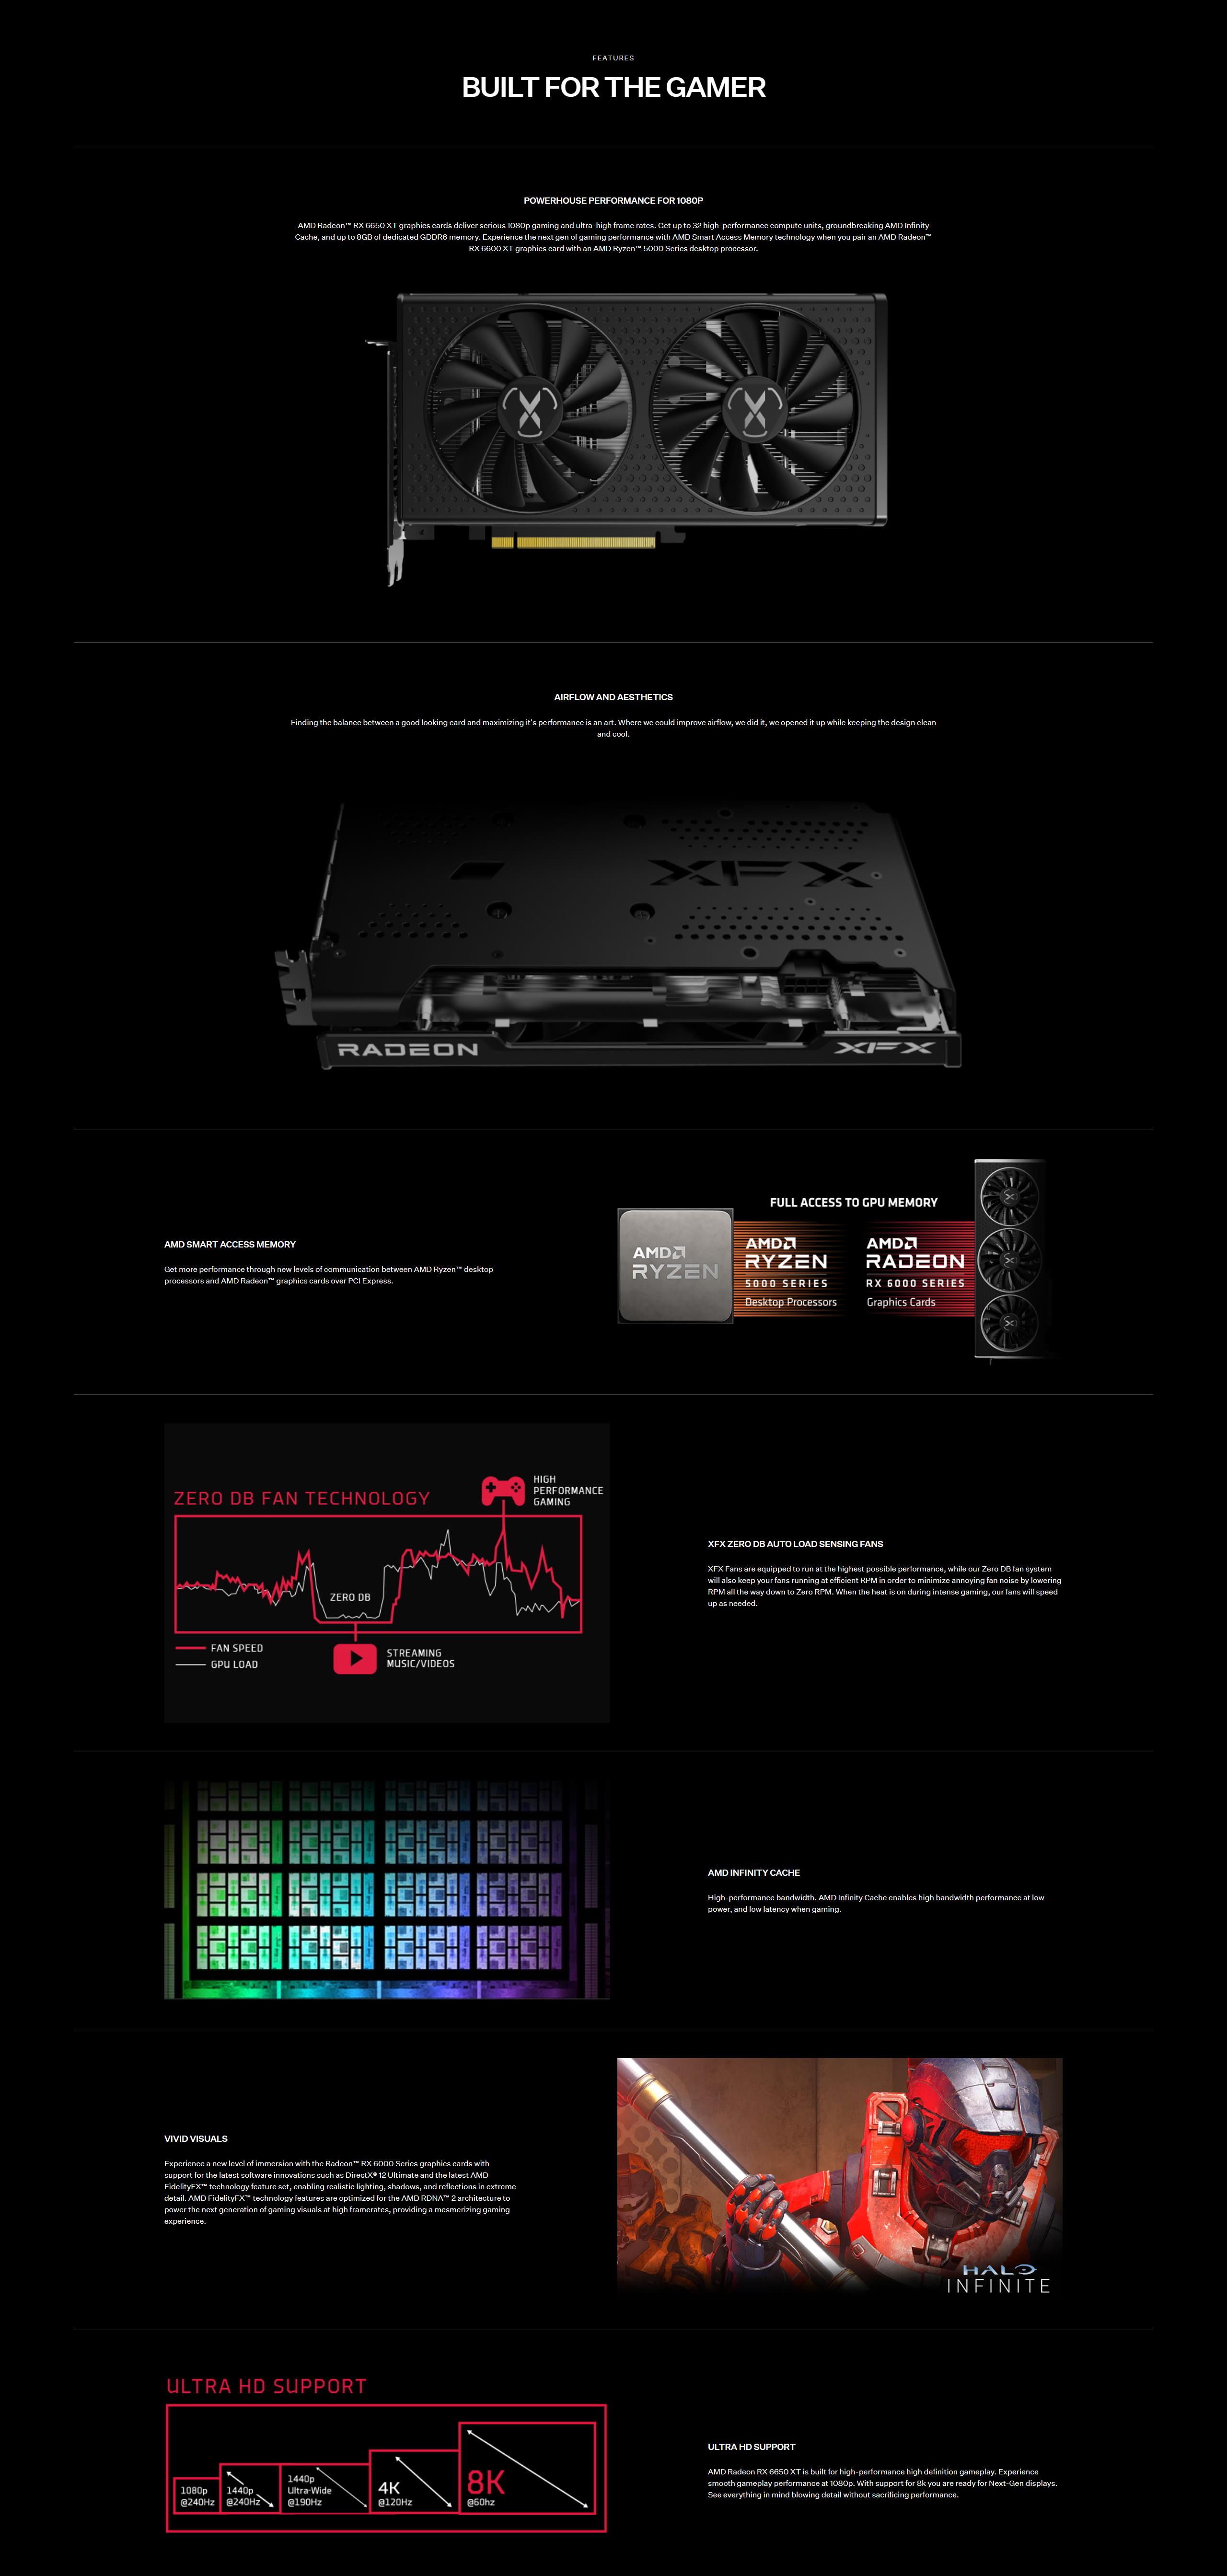 A large marketing image providing additional information about the product XFX Radeon RX 6650 XT Speedster SWFT 210 Core 8GB GDDR6 - Additional alt info not provided